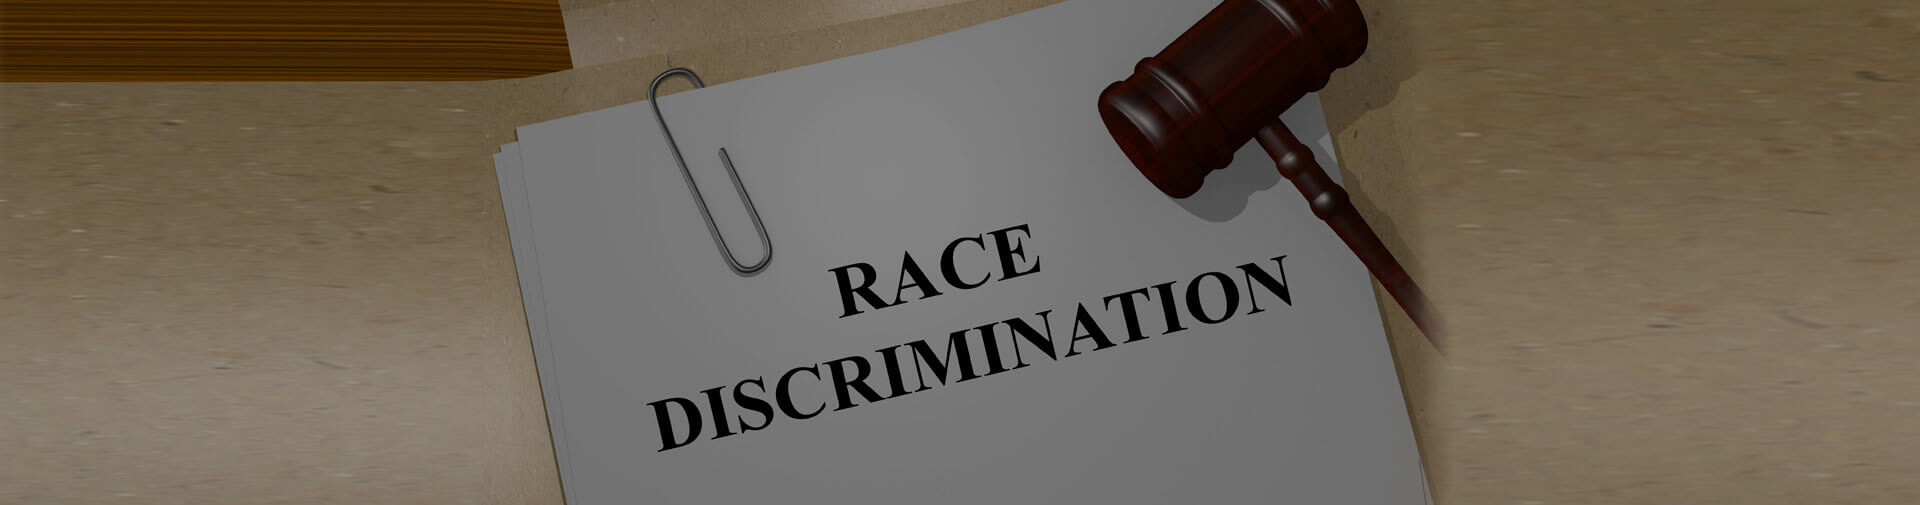 Maryland Racial Discrimination Lawyers The Law Firm Of J W Stafford